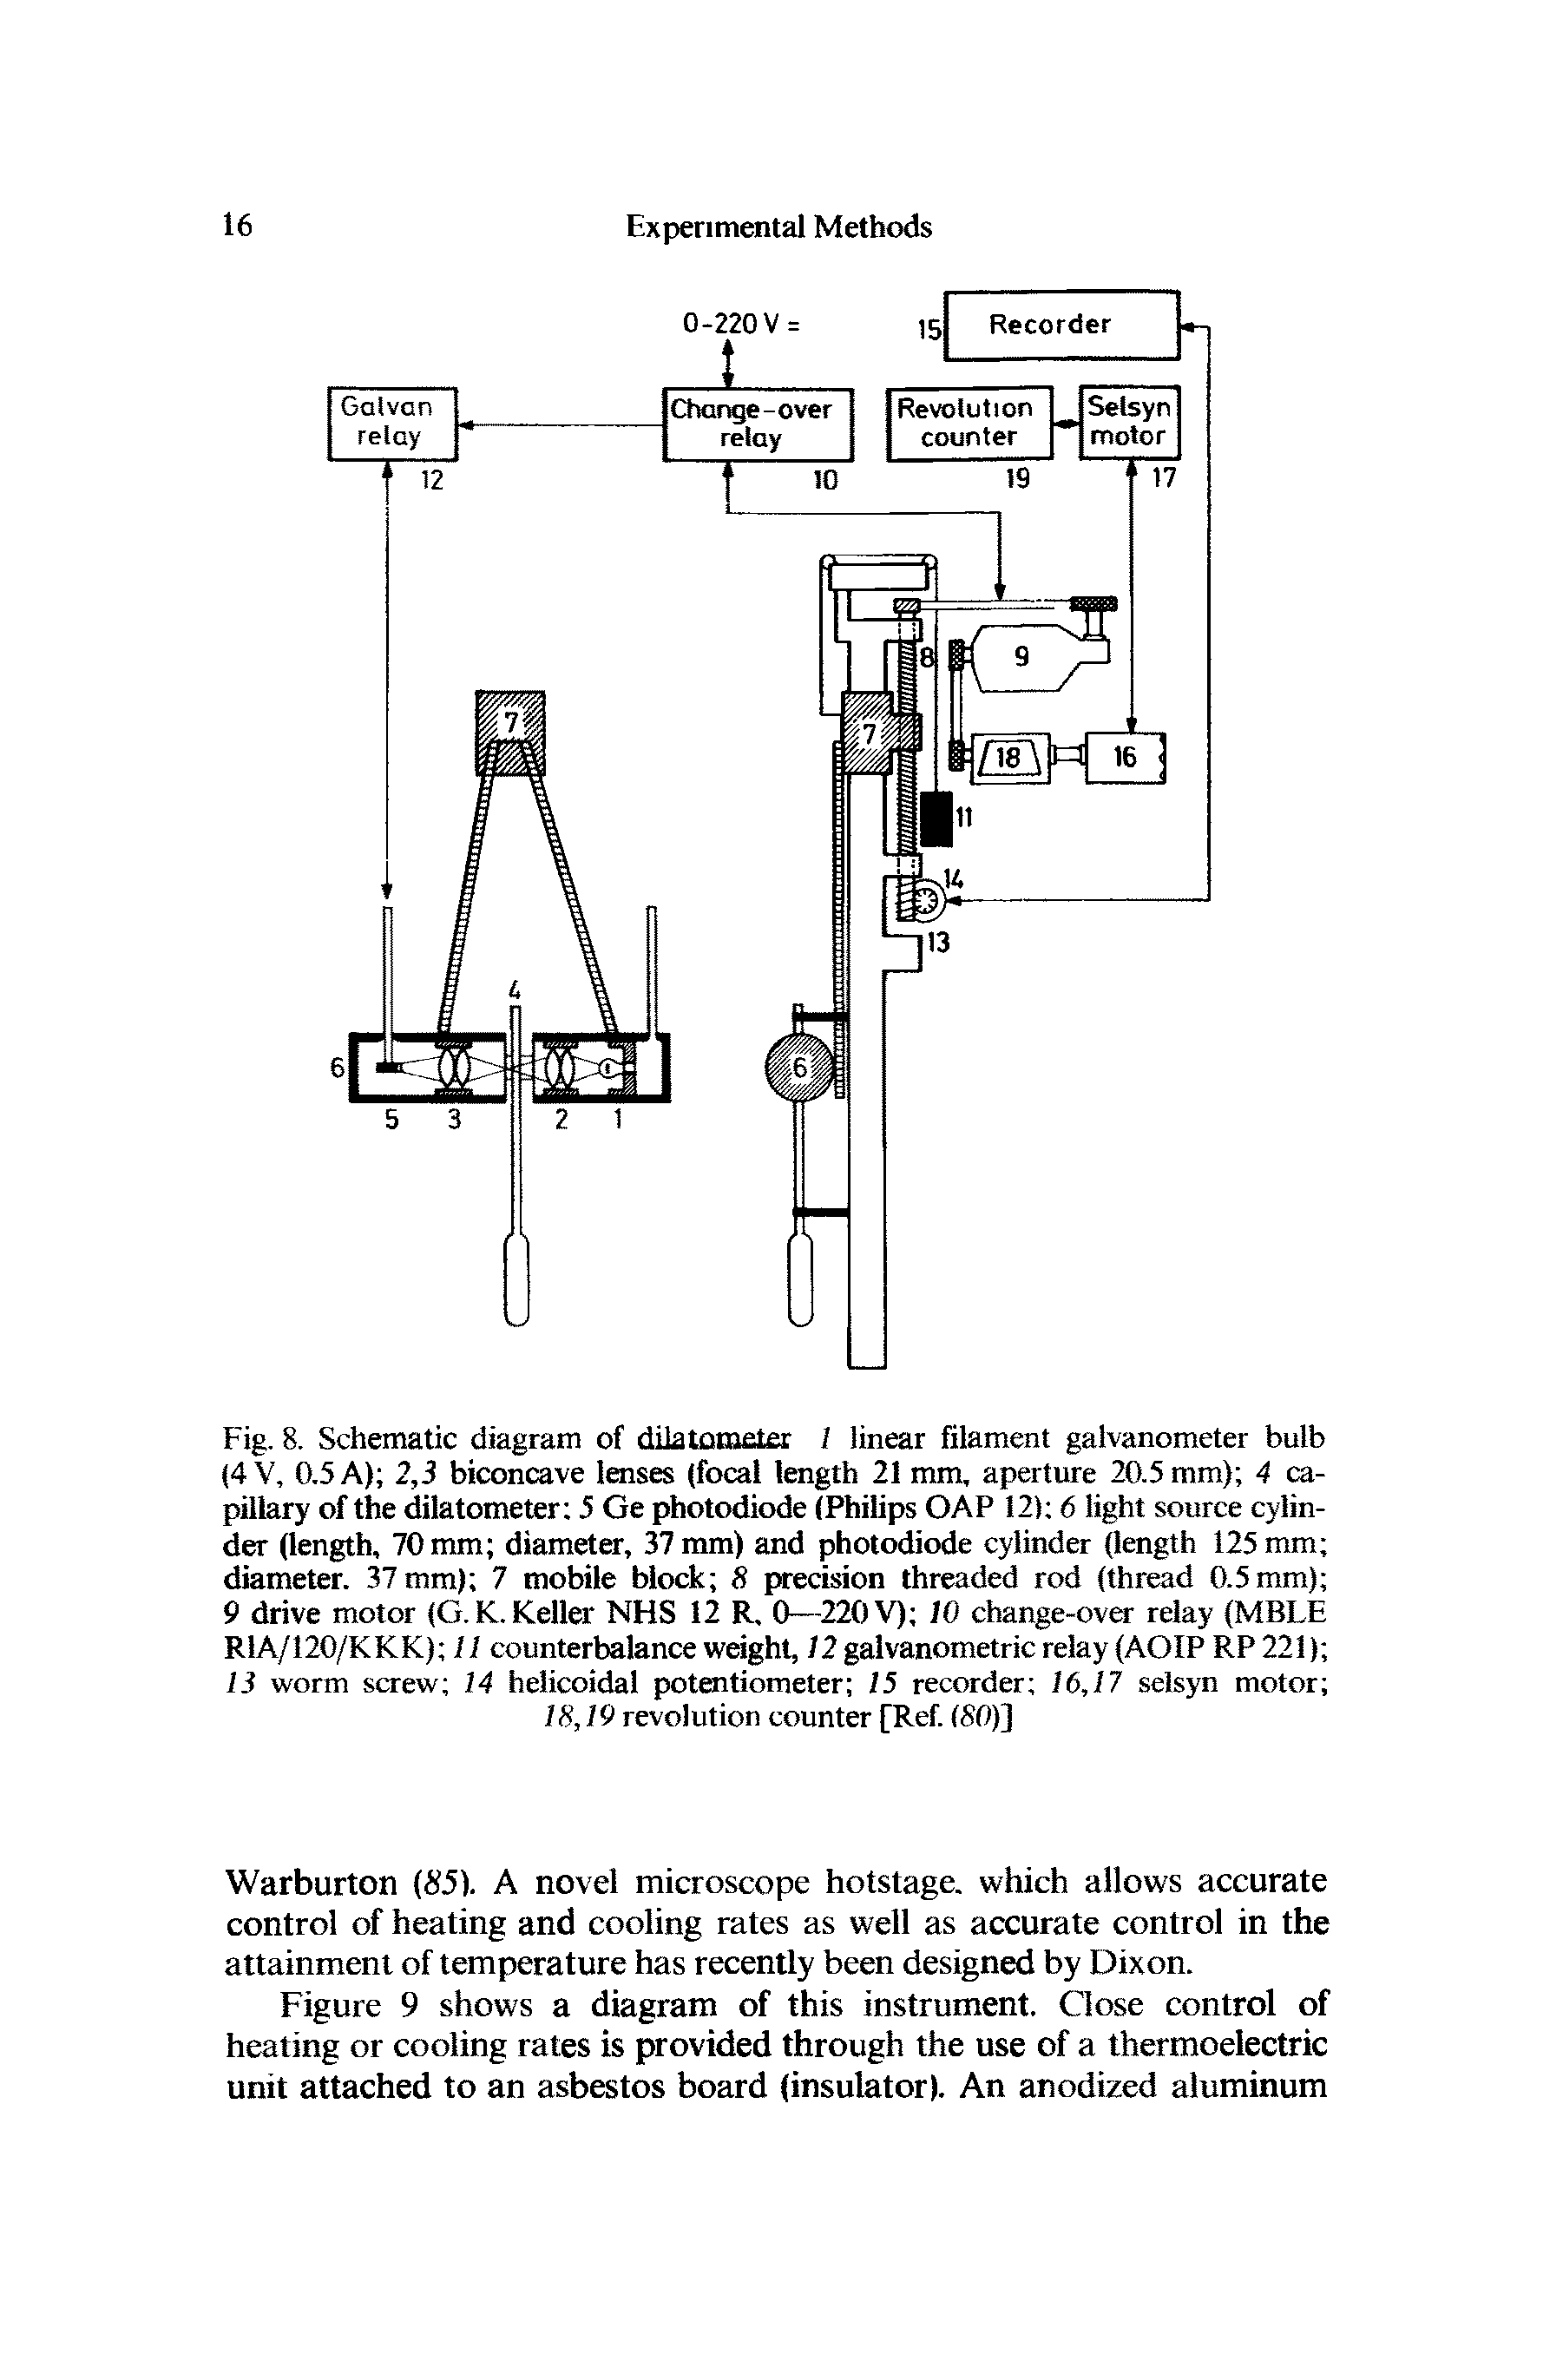 Fig. 8. Schematic diagram of dilatometer 1 linear filament galvanometer bulb (4V, 0.5 A) 2,3 biconcave lenses (focal length 21 mm, aperture 20.5 mm) 4 capillary of the dilatometer 5 Ge photodiode (Philips GAP 12) 6 light source cylinder (length, 70 mm diameter, 37 mm) and photodiode cylinder (length 125 mm diameter. 37 mm) 7 mobile block 8 precision threaded rod (thread 0.5 mm) 9 drive motor (G.K. Keller NHS 12 R, 0--220V) 10 change-over relay (MBLE R1A/120/KKK) 11 counterbalance weight, 12 galvanometric relay (AOIP RP 221) 13 worm screw 14 helicoidal potentiometer 15 recorder 16,17 selsyn motor 18,19 revolution counter [Ref. (SO)]...